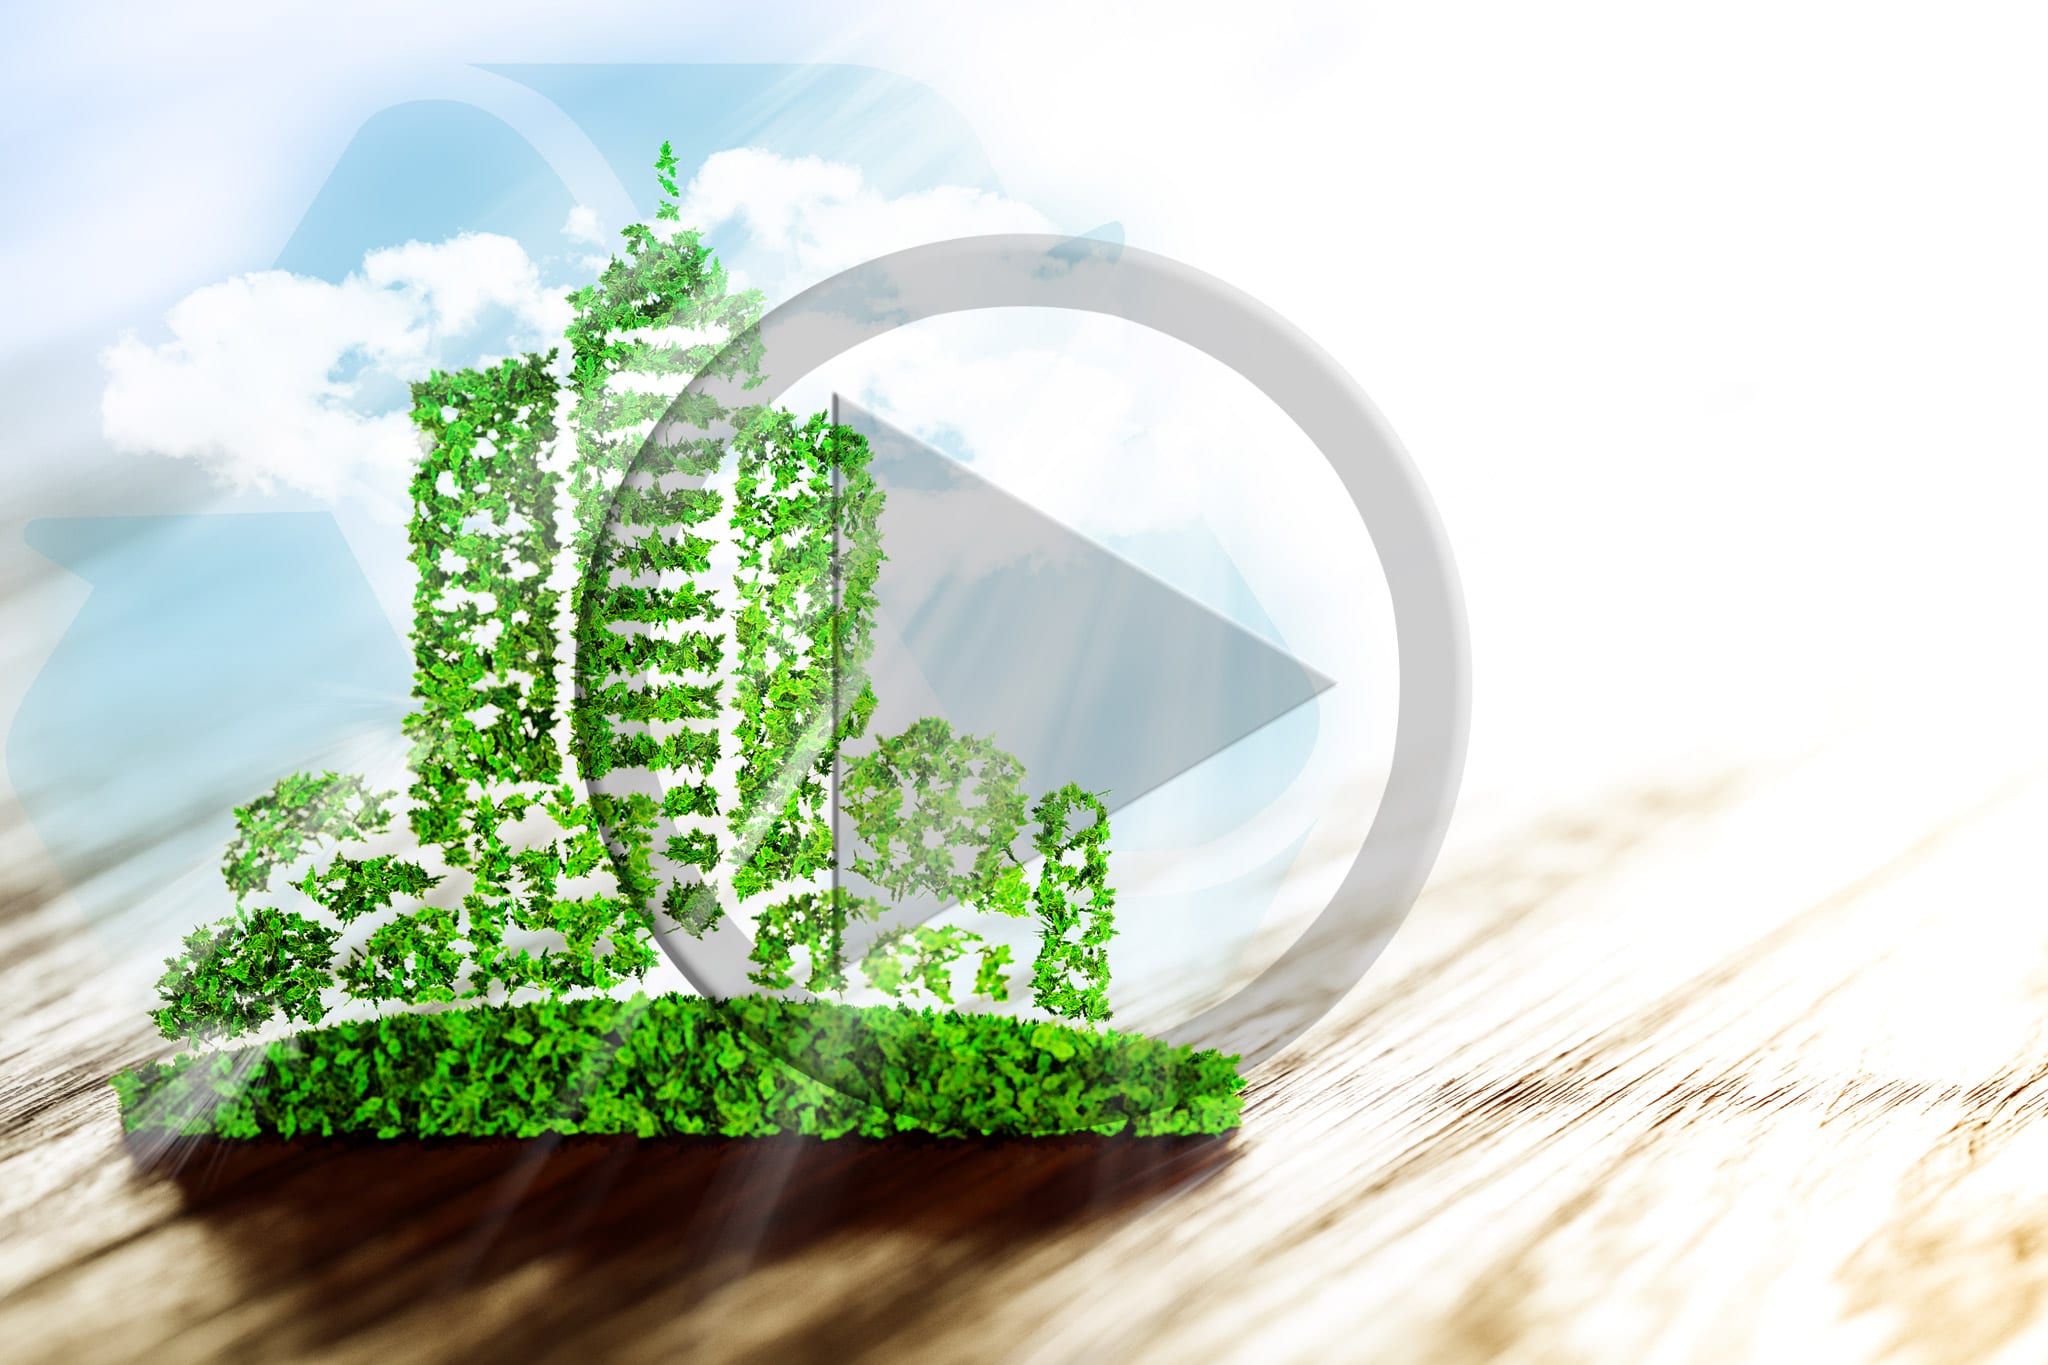 Sustainable Architecture Video